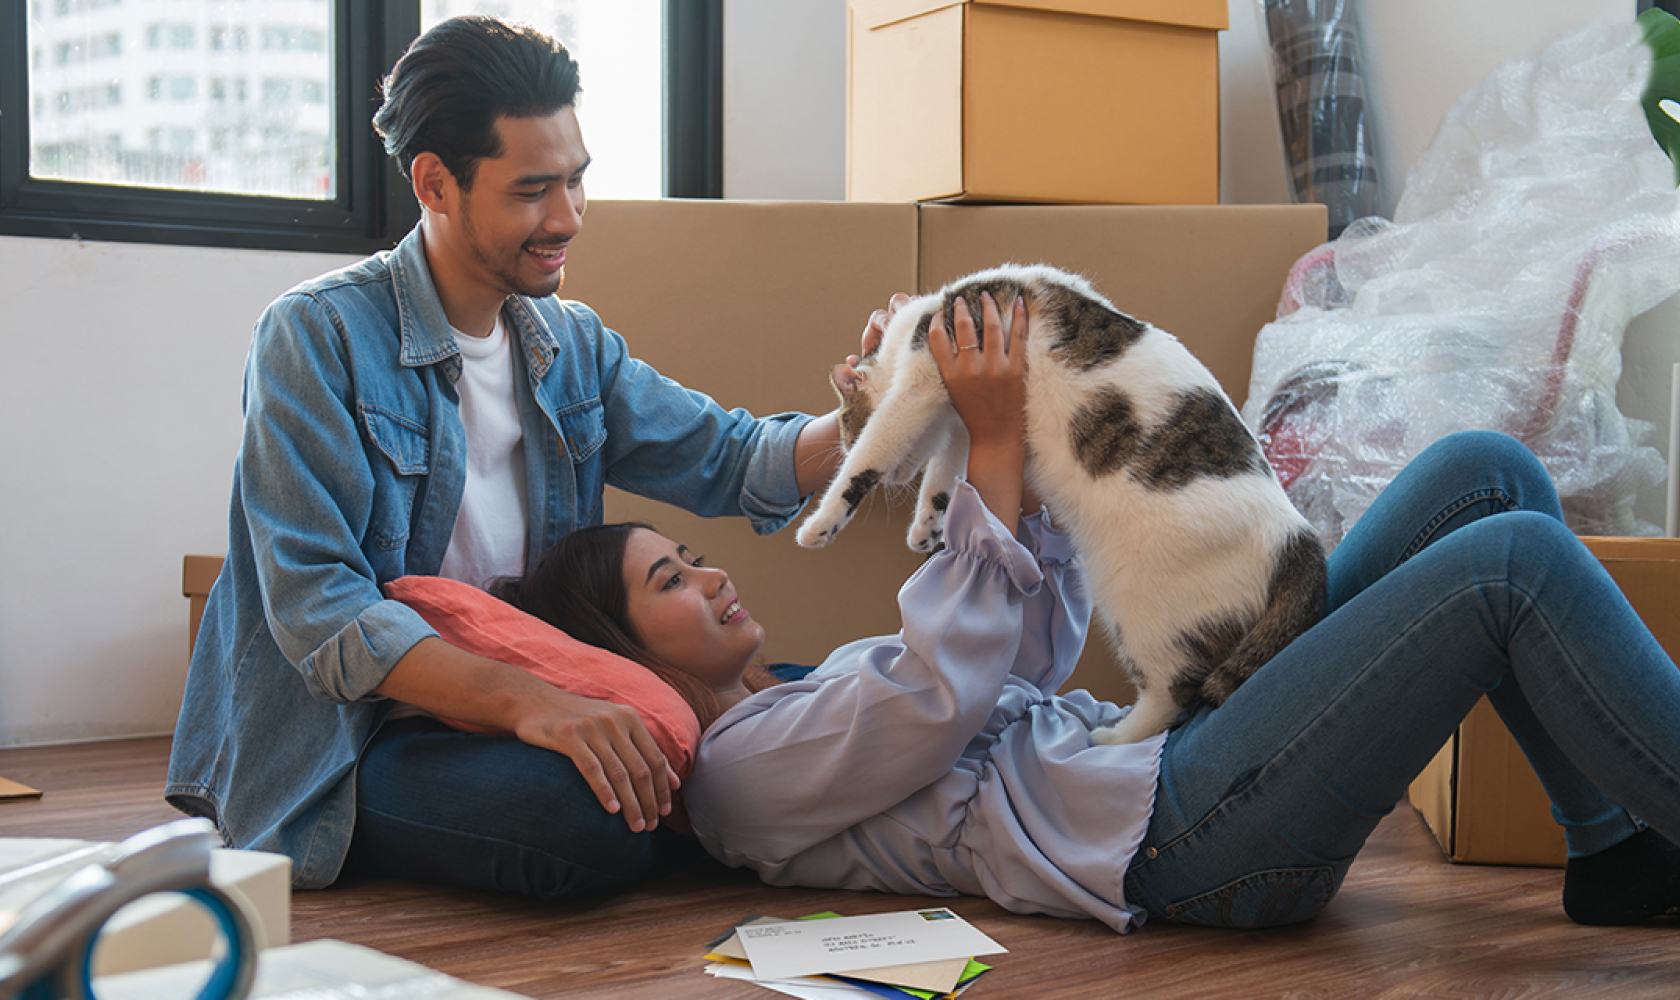 A smiling couple play with a cat on the floor. There is a small stack of mail beside them and stacked cardboard boxes in the background.